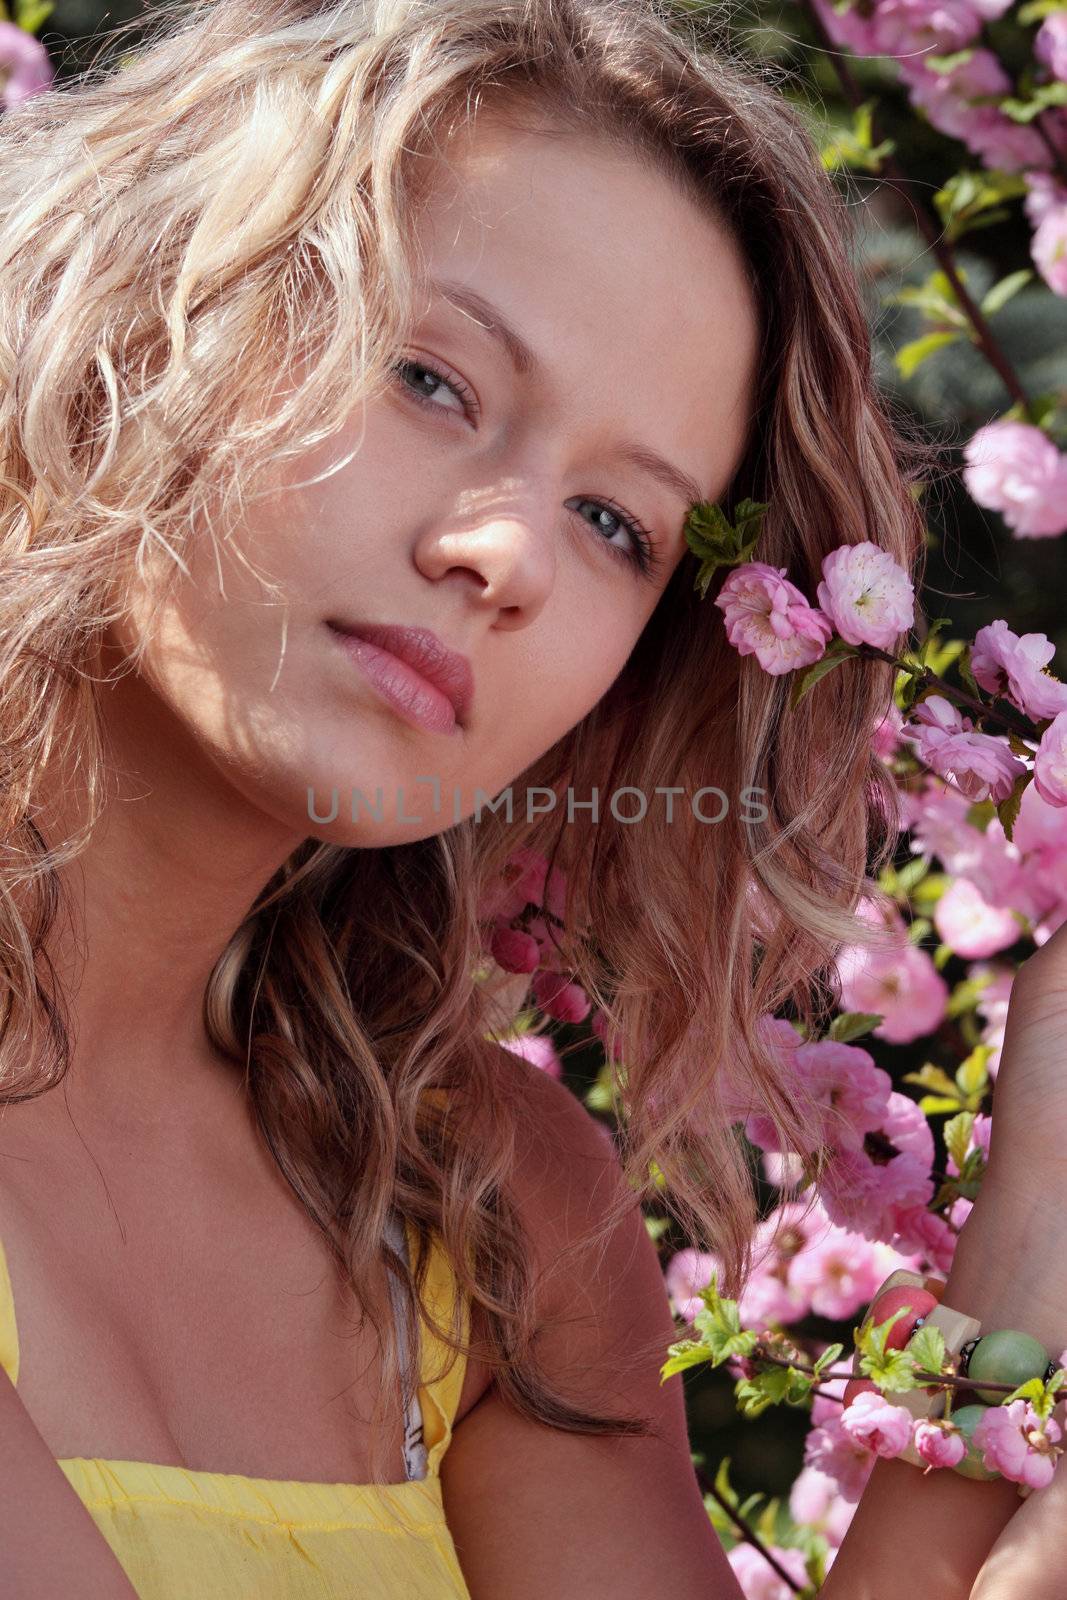 Beautiful blond woman between tree with pink flowers - portrait